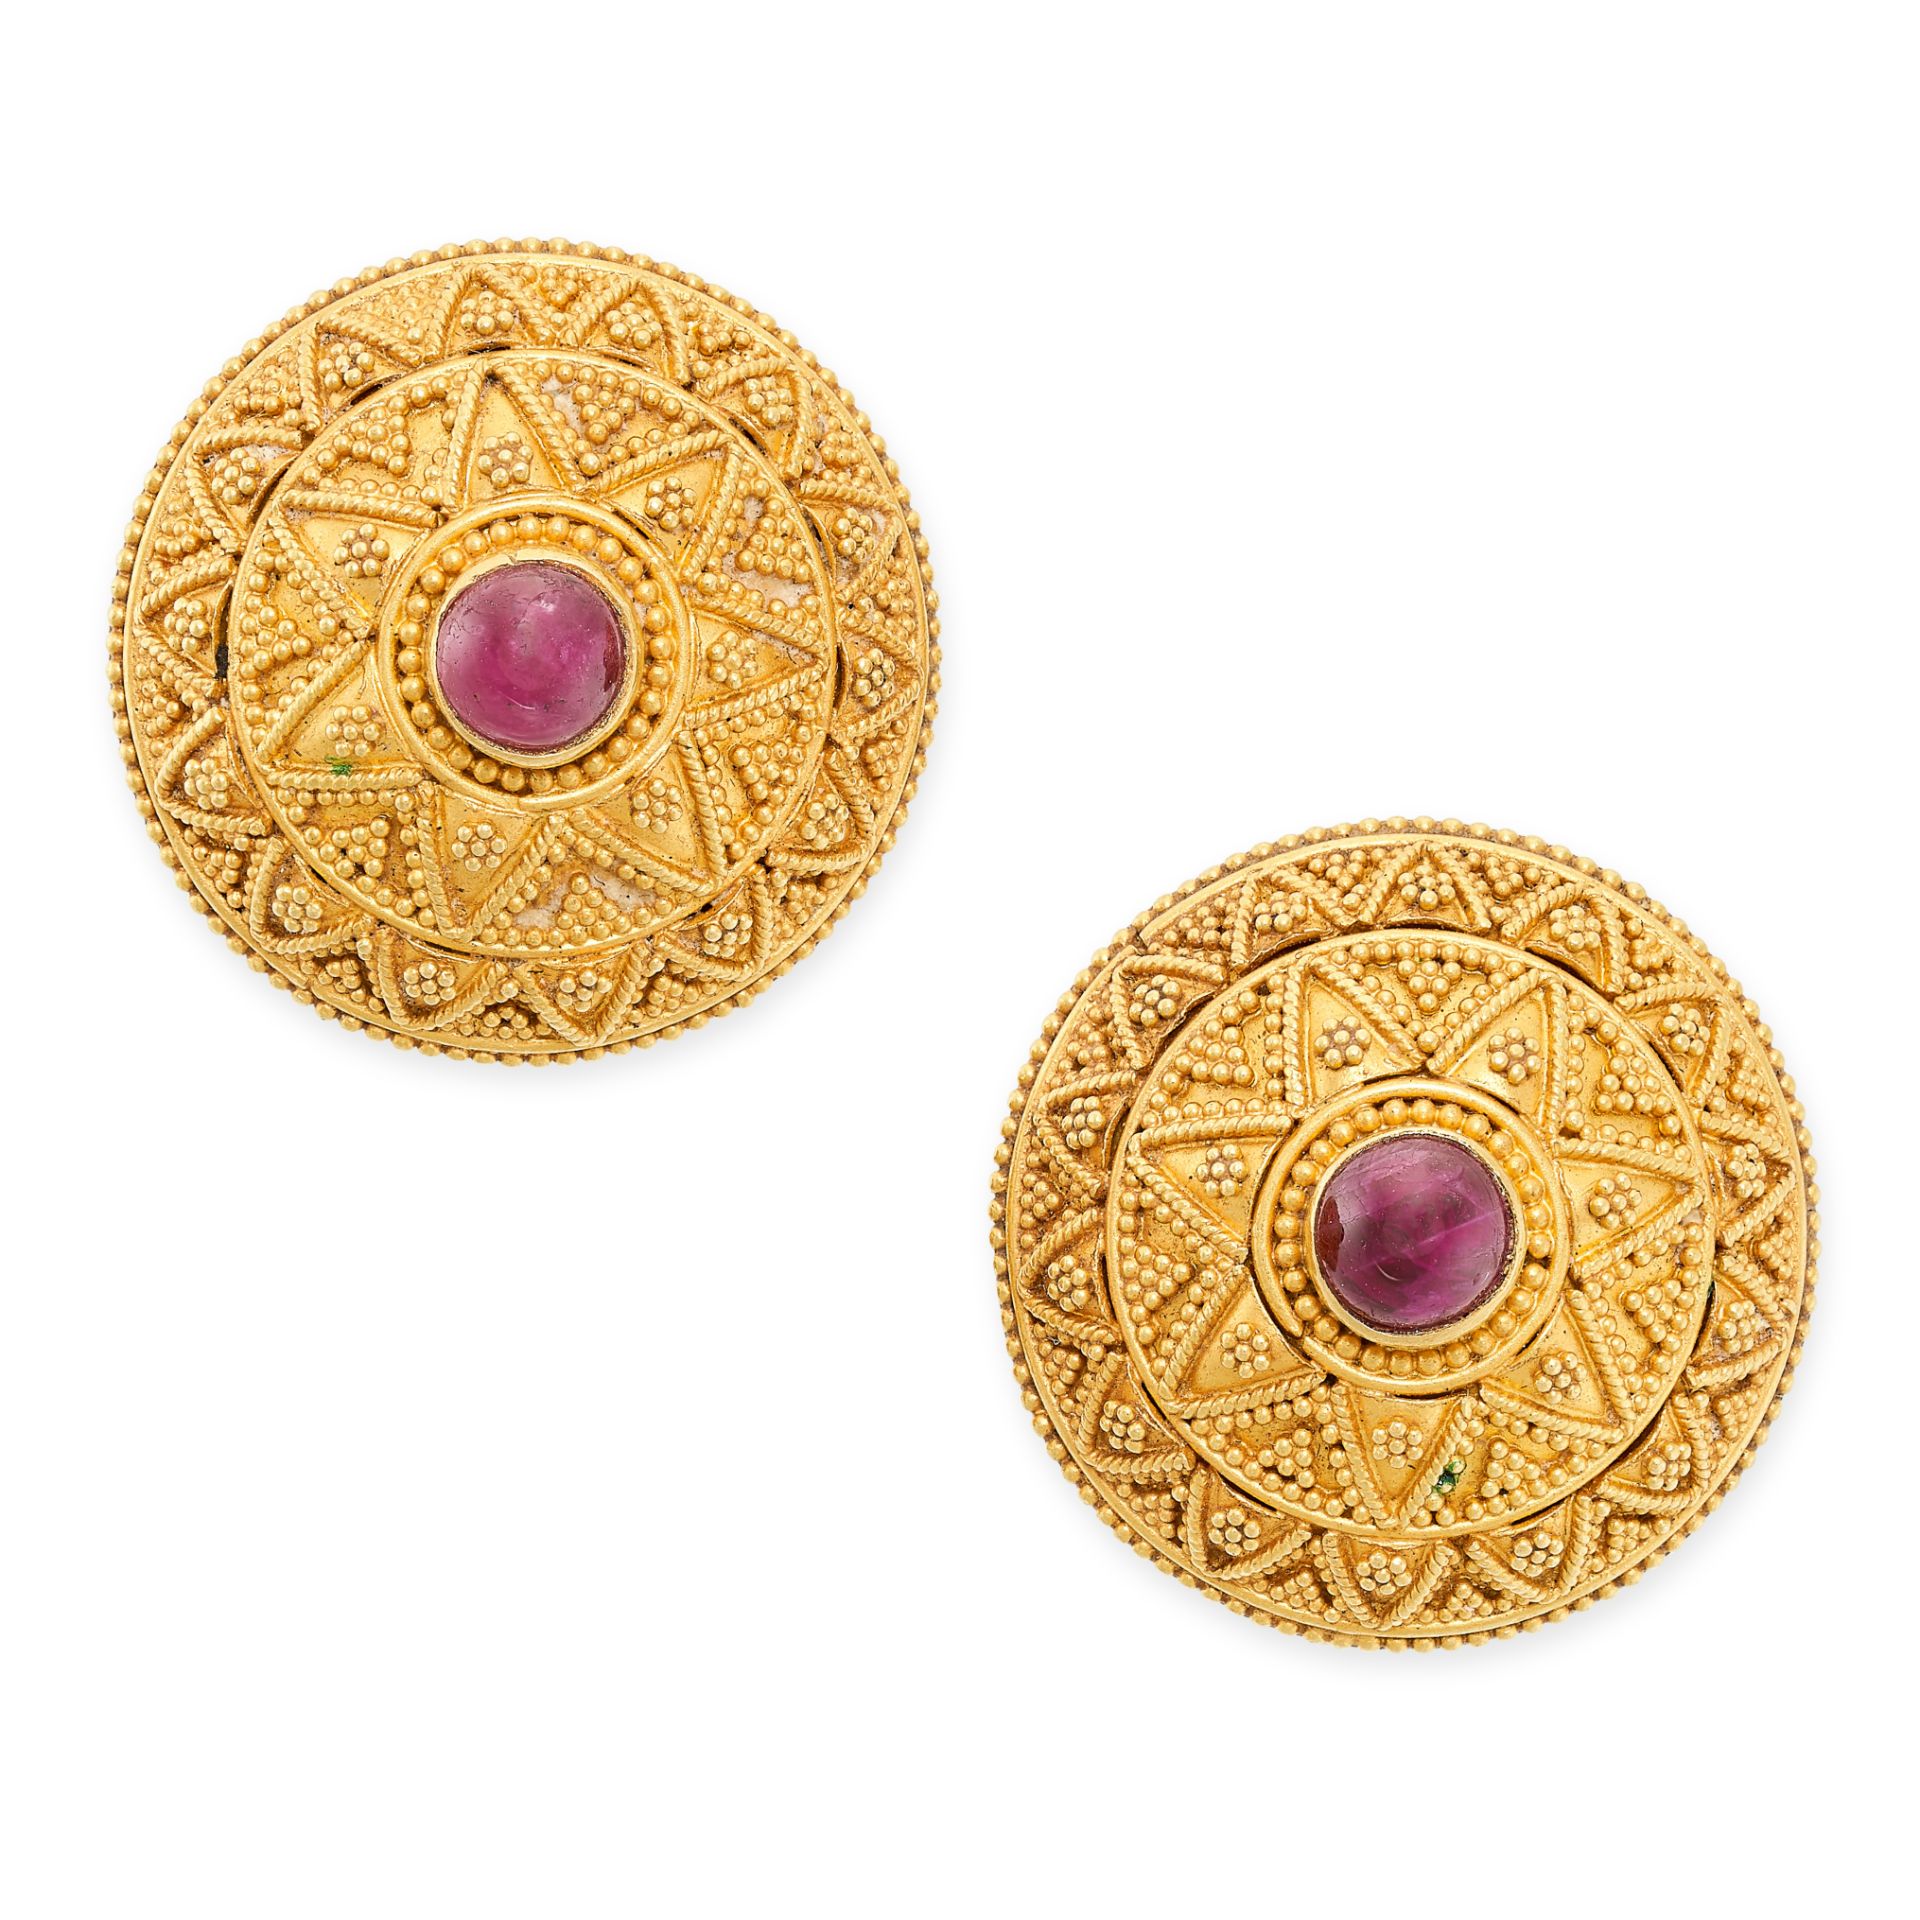 LALAOUNIS, A PAIR OF VINTAGE RUBY EARRINGS in 18ct and 22ct yellow gold, the circular face set